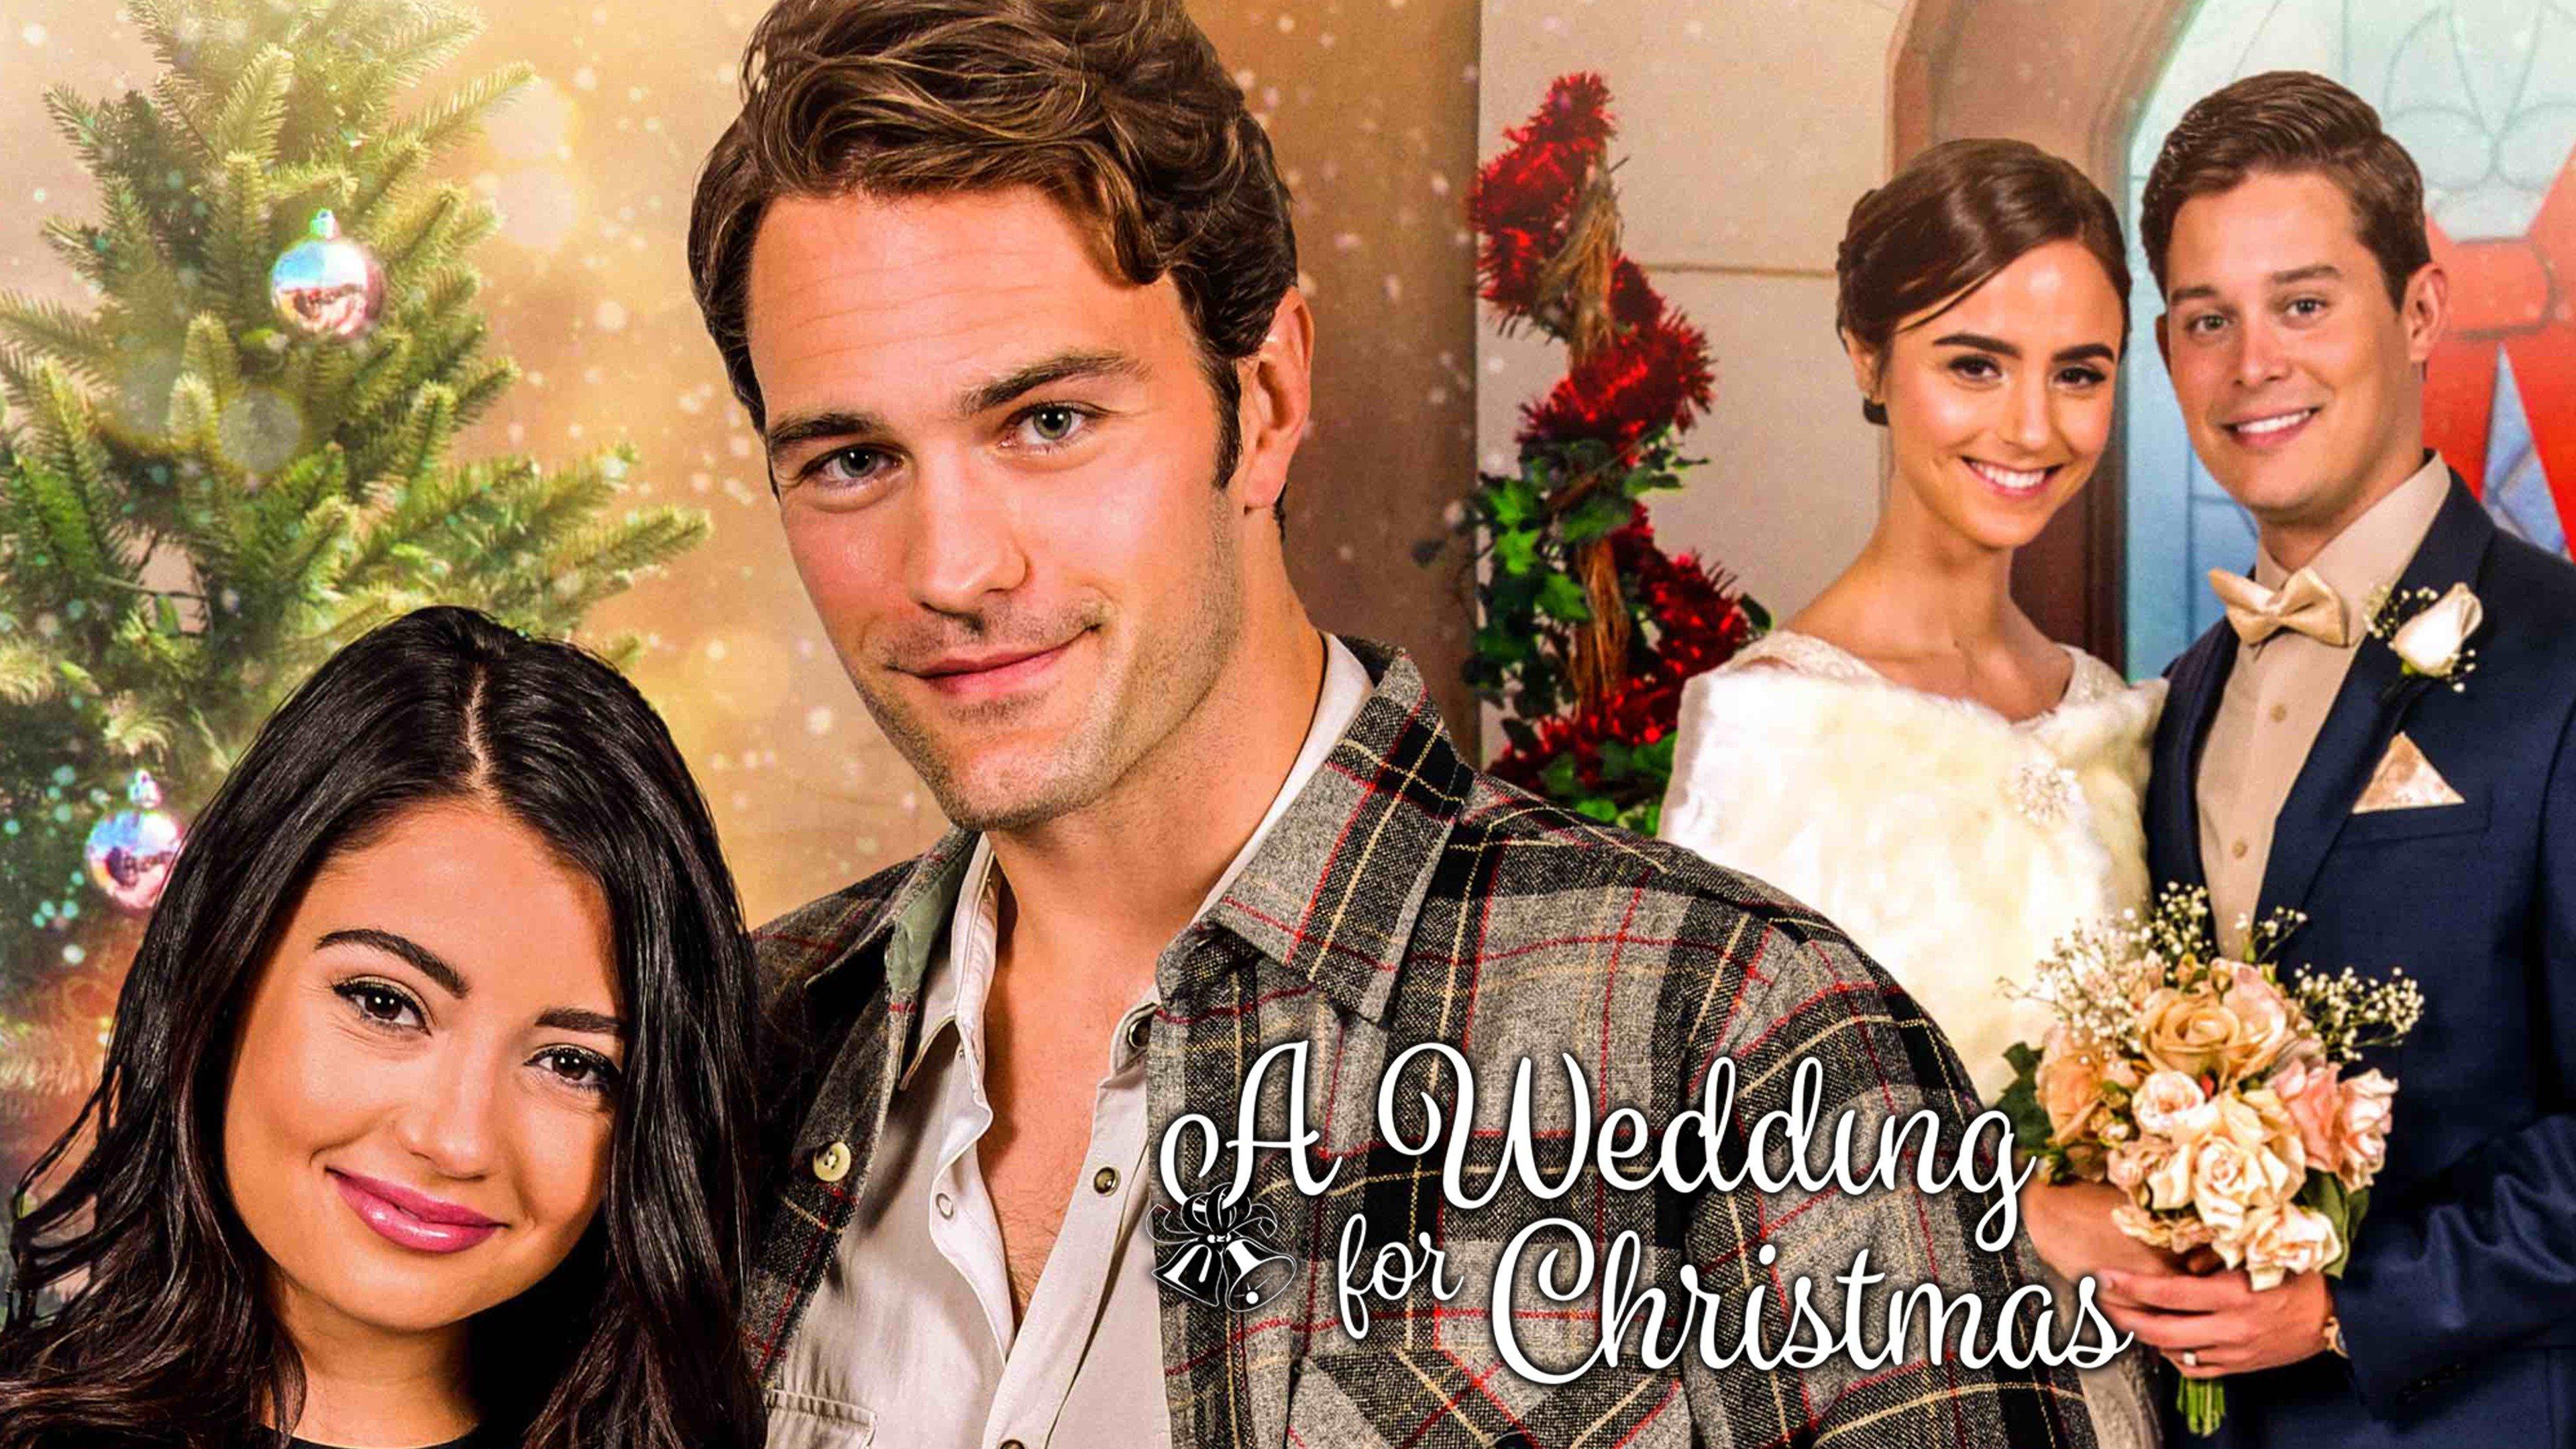 Watch A Wedding for Christmas Streaming Online on Philo (Free Trial)